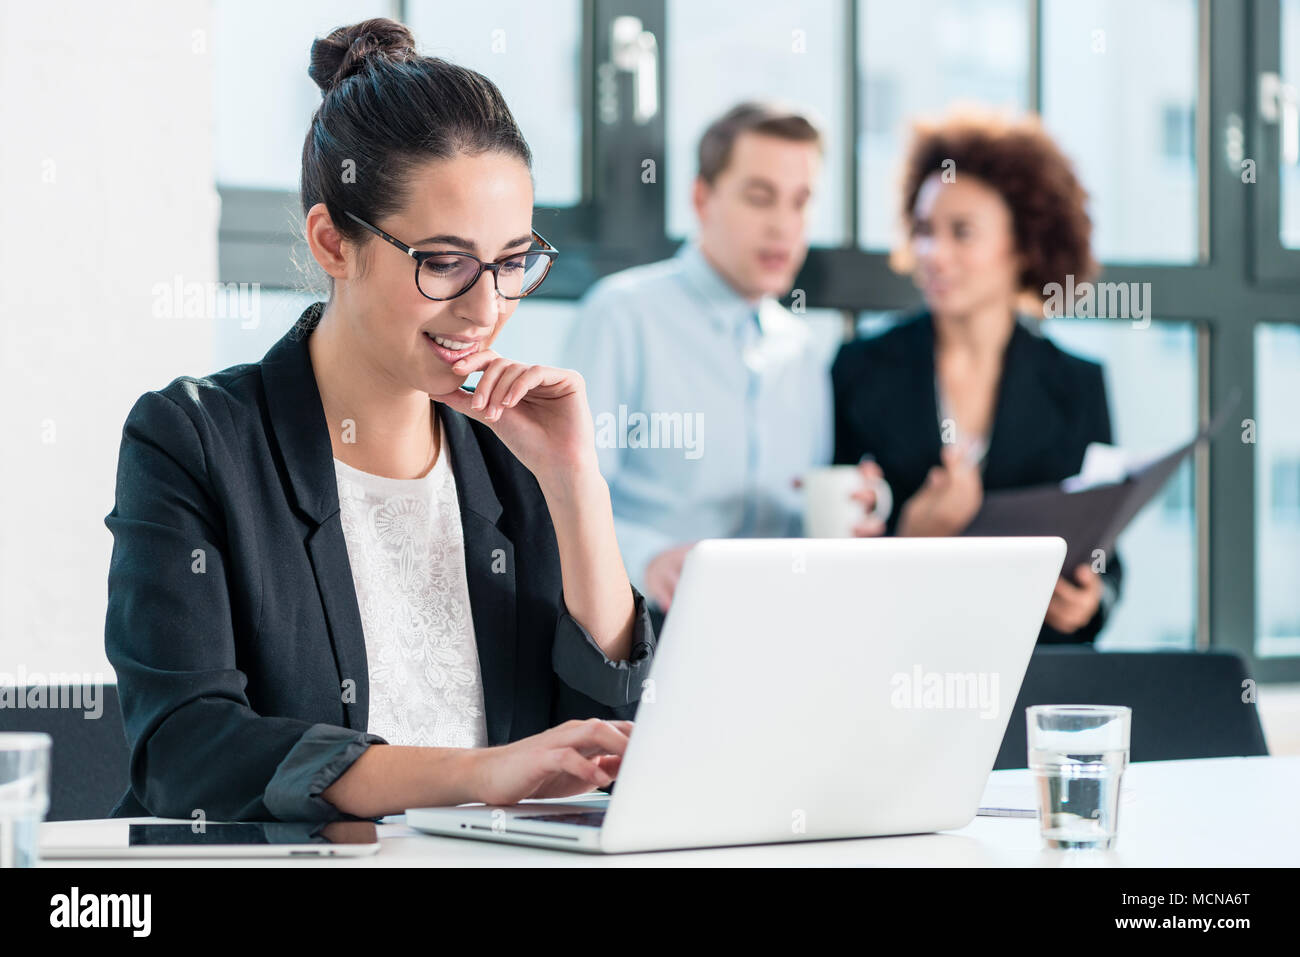 Young woman smiling while using a laptop in the office Stock Photo